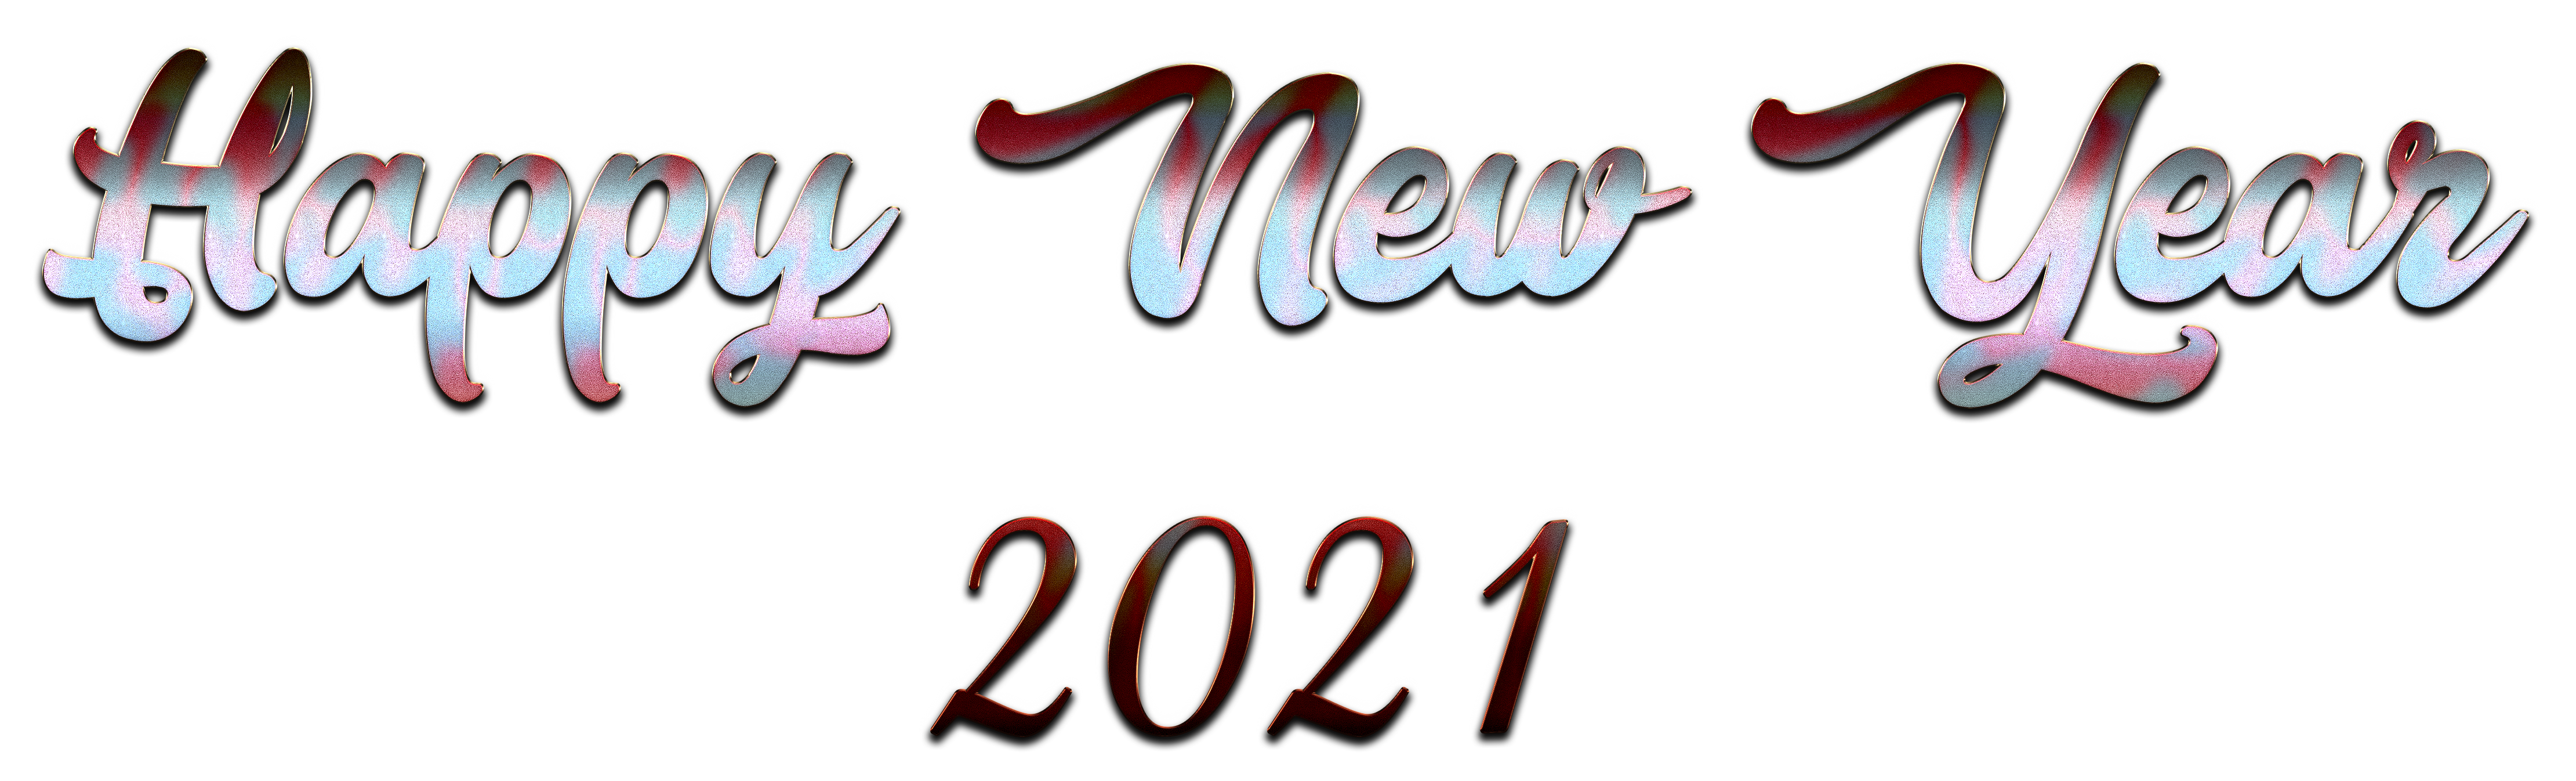 Happy New Year 2021 Transparent Image